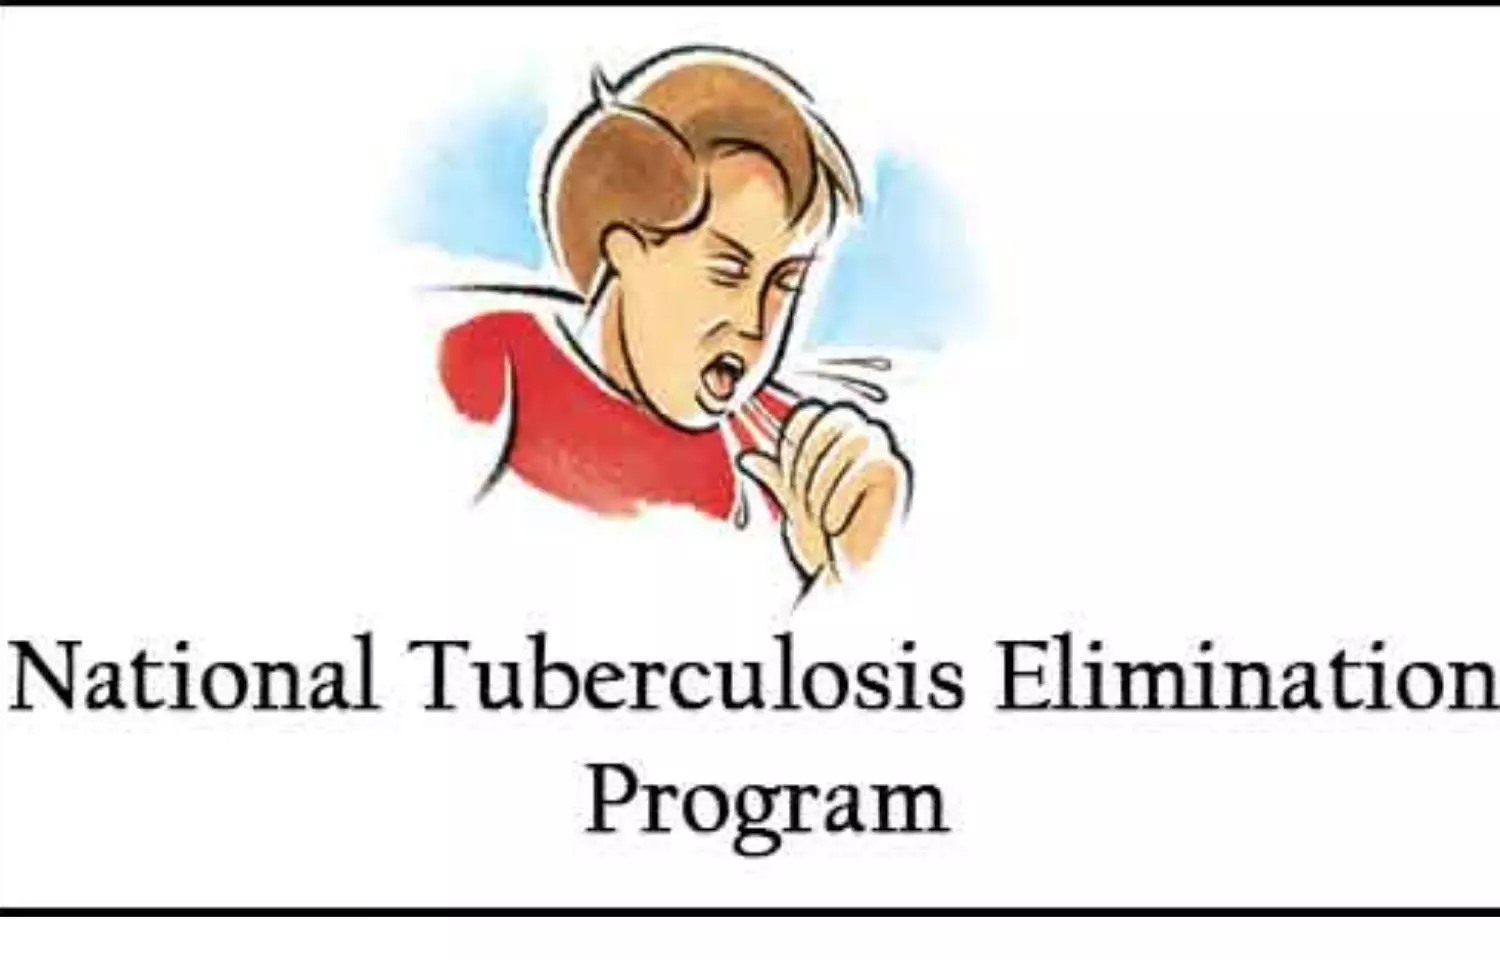 National TB elimination program: Ministry of Health & Family Welfare awards Gold medal to three districts of J&K